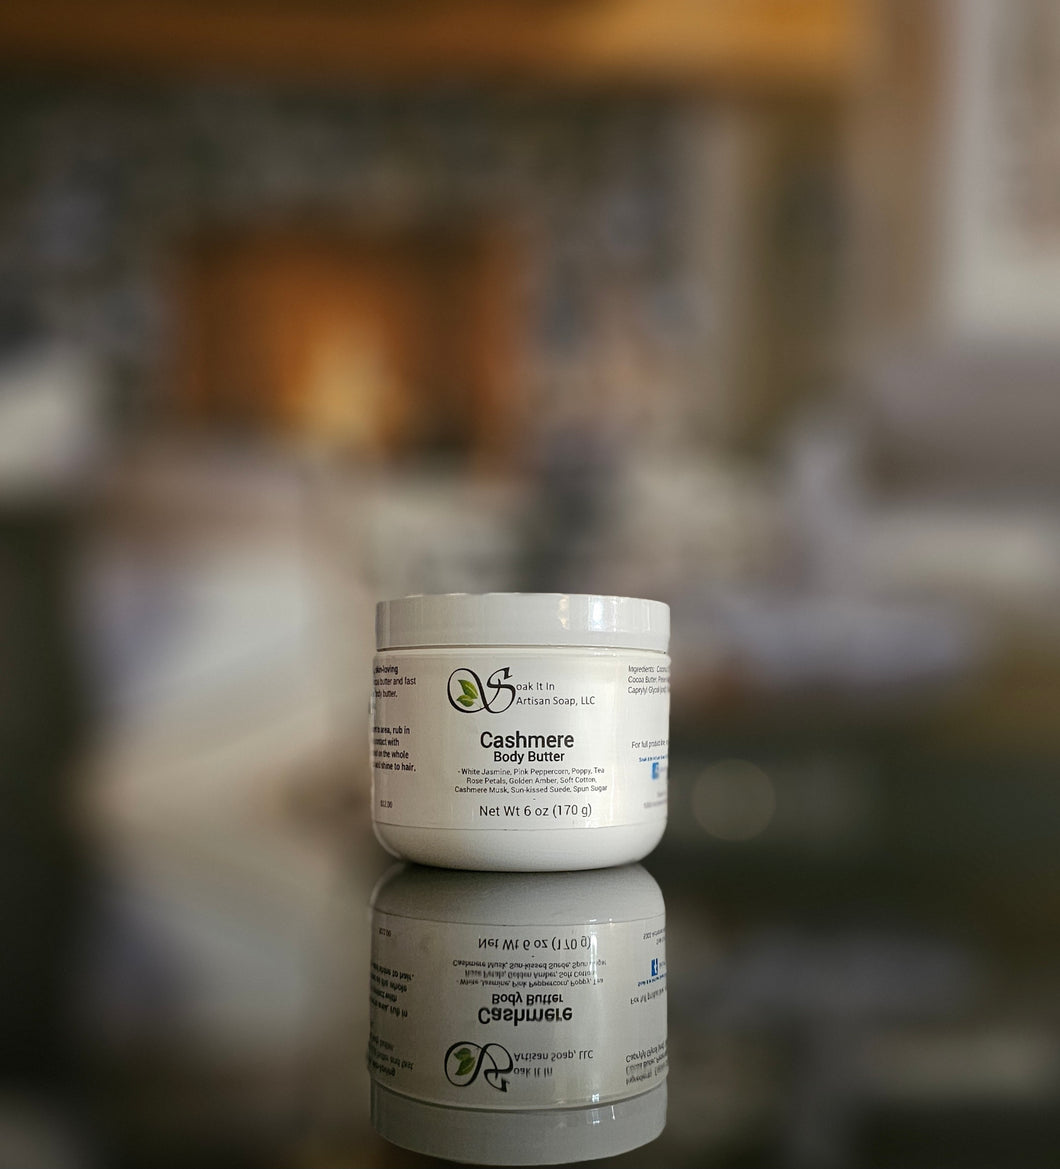 CASHMERE BODY BUTTER